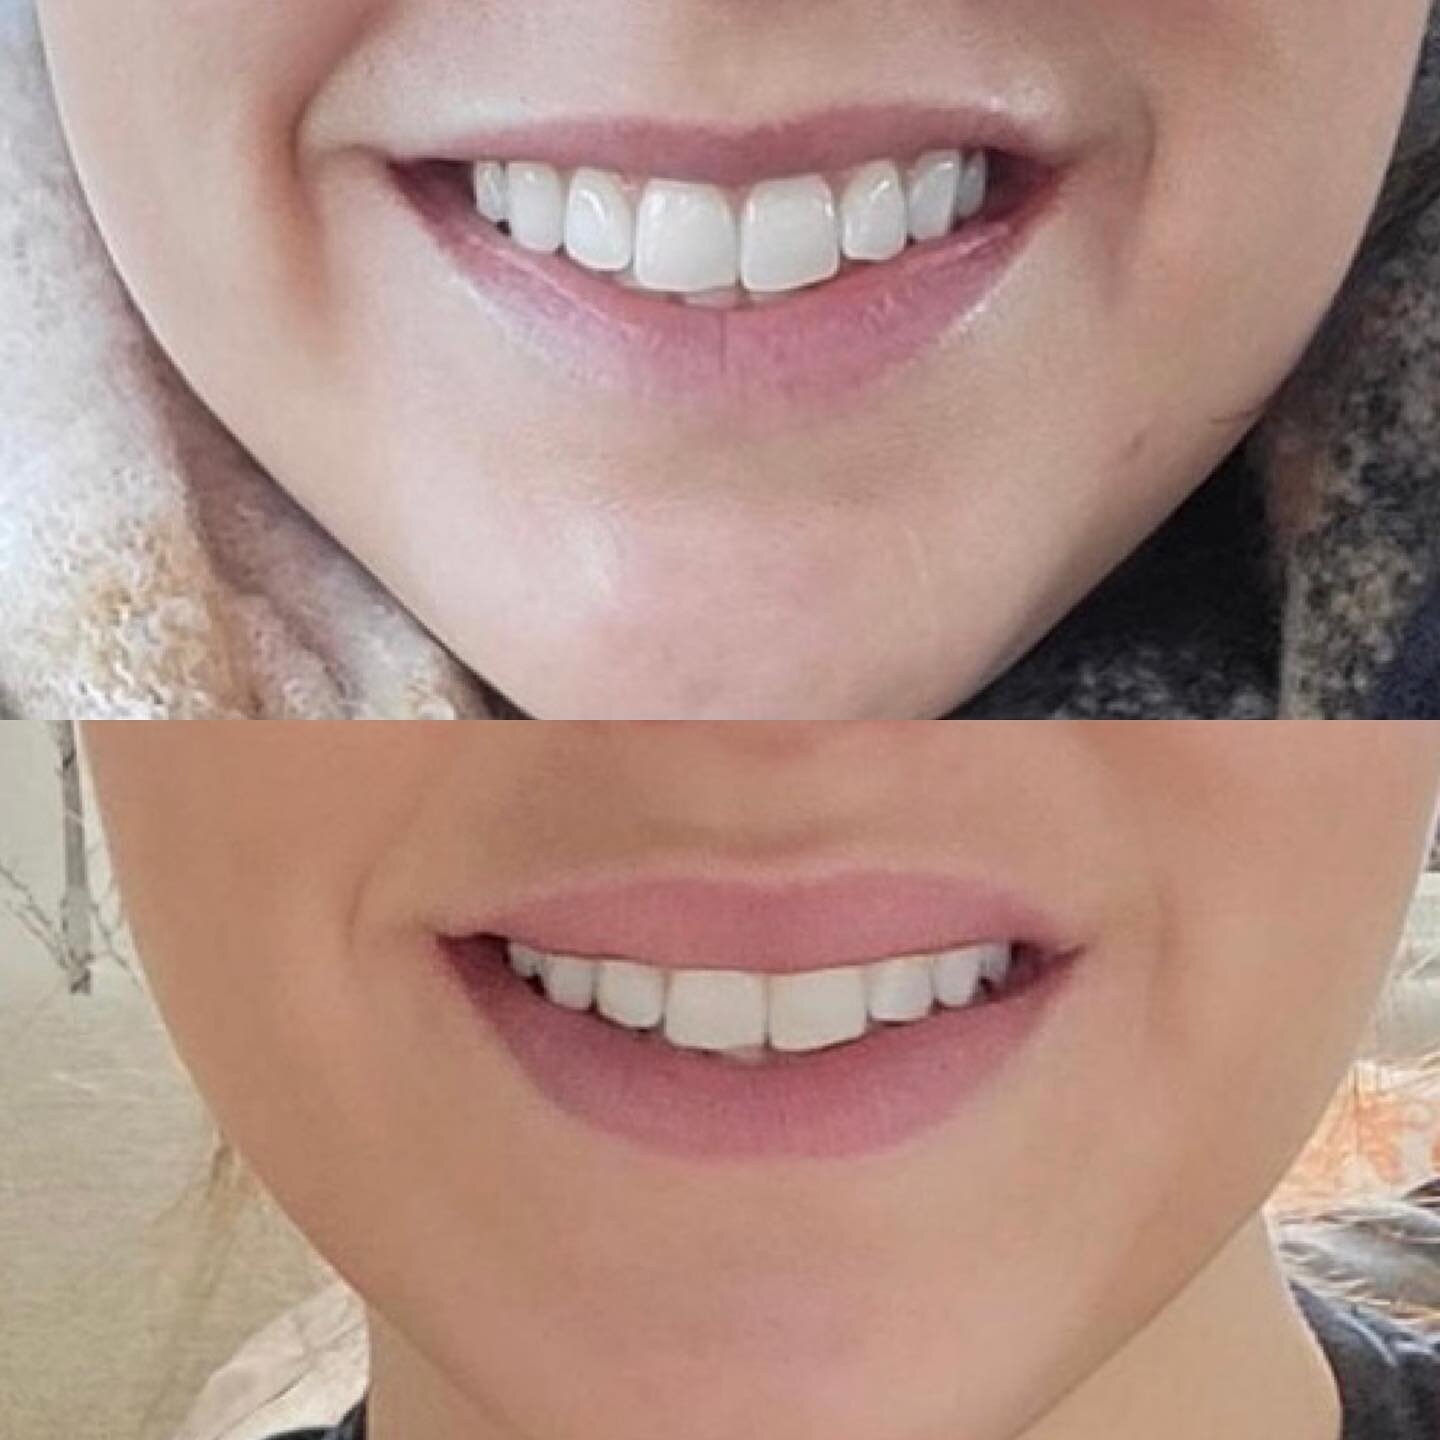 Lip flip before + after💋

A lip flip consists of placing botox along the lip to prevent the lip from curling in when you smile. Lip flips can help correct a gummy smile and give the appearance of a fuller lip. ✨